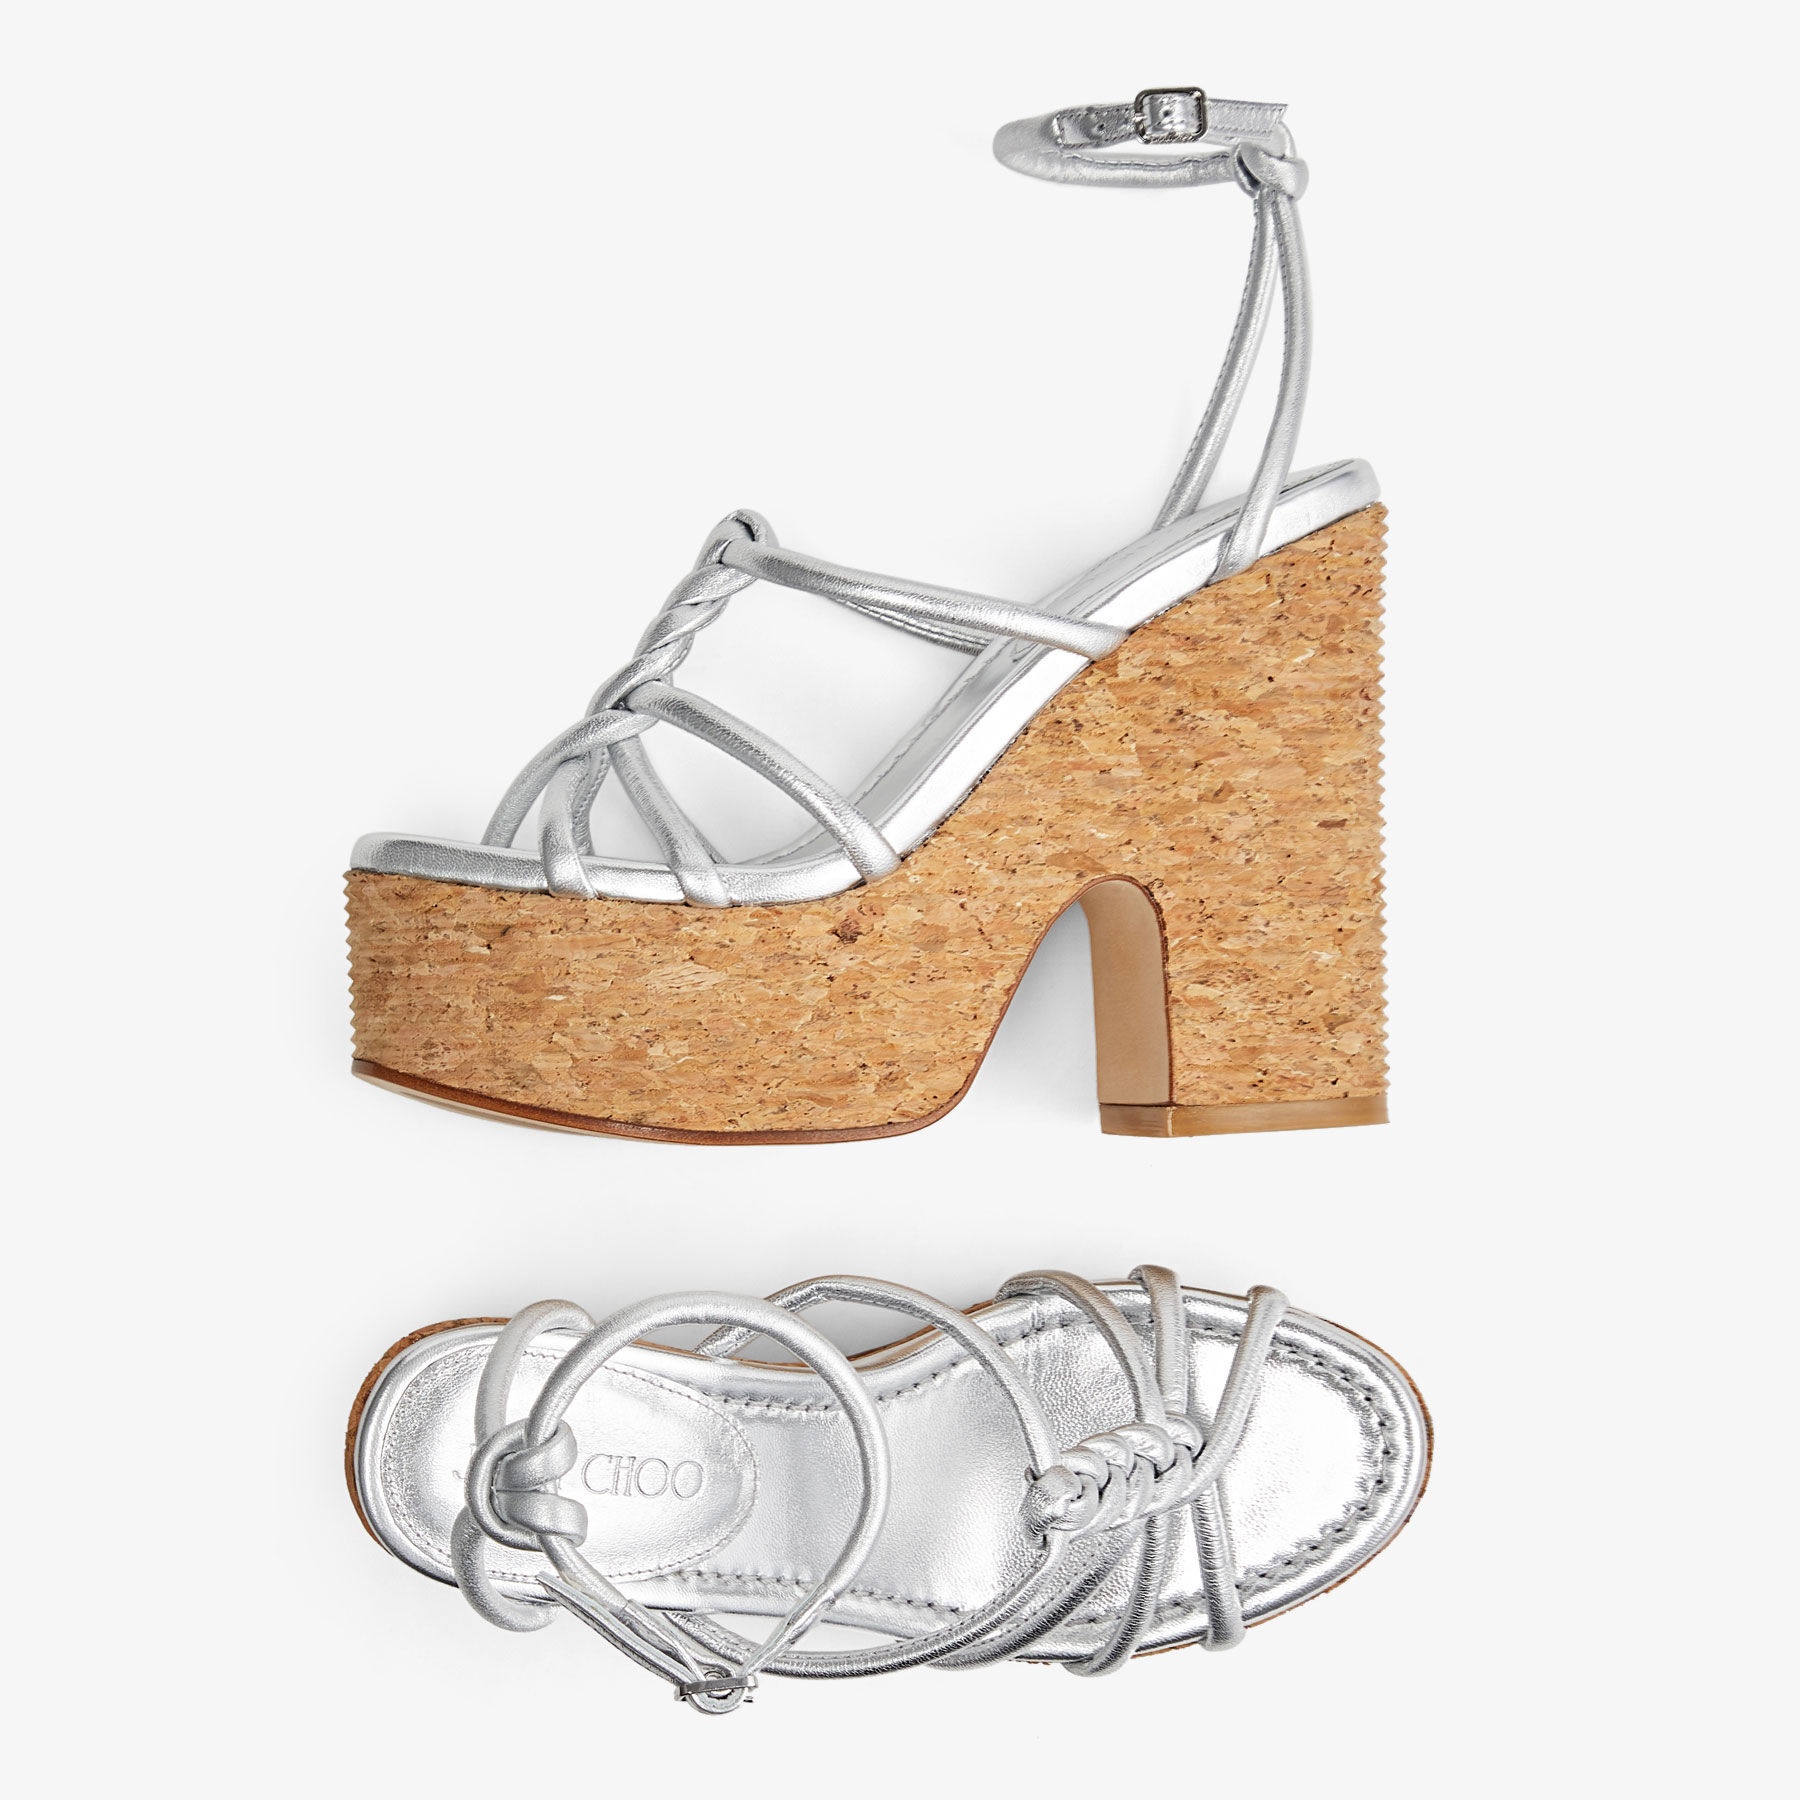 Clare Wedge 130
Silver Metallic Nappa Leather Wedge Sandals - 5